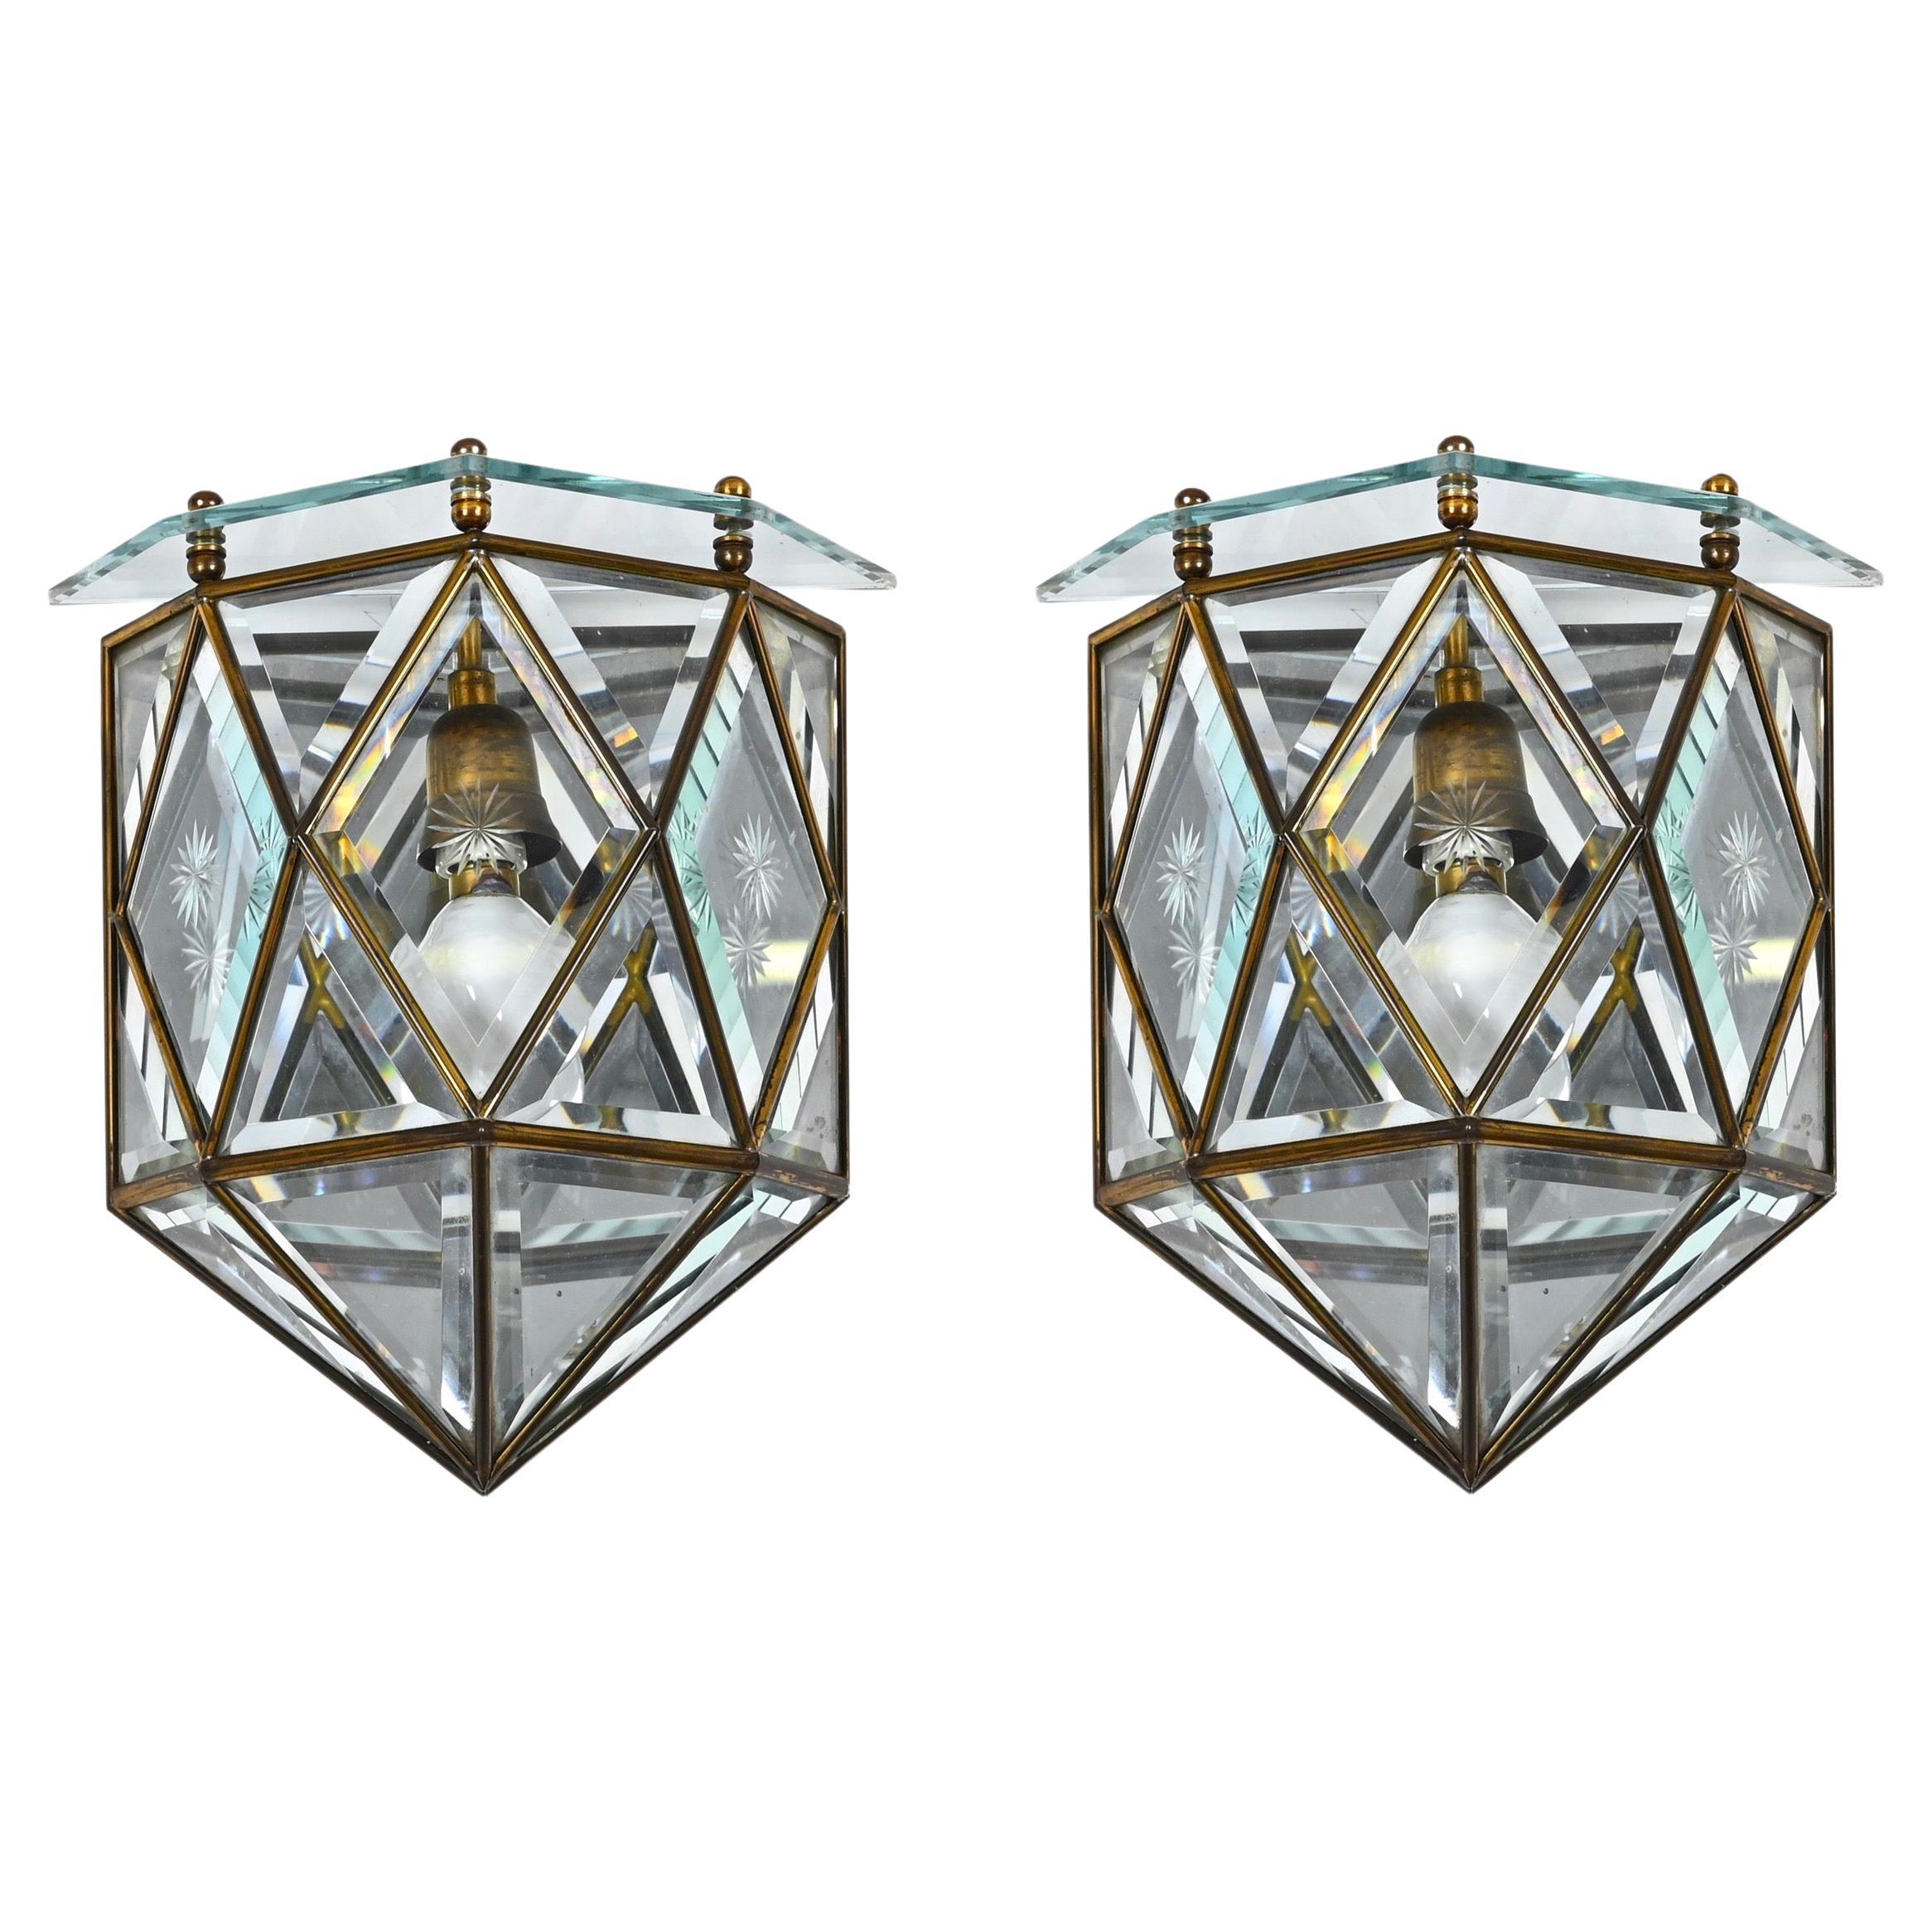 Fontana Arte Pair of Sconces in Beveled Glass, Brass and Mirror, Italy, 1940s For Sale